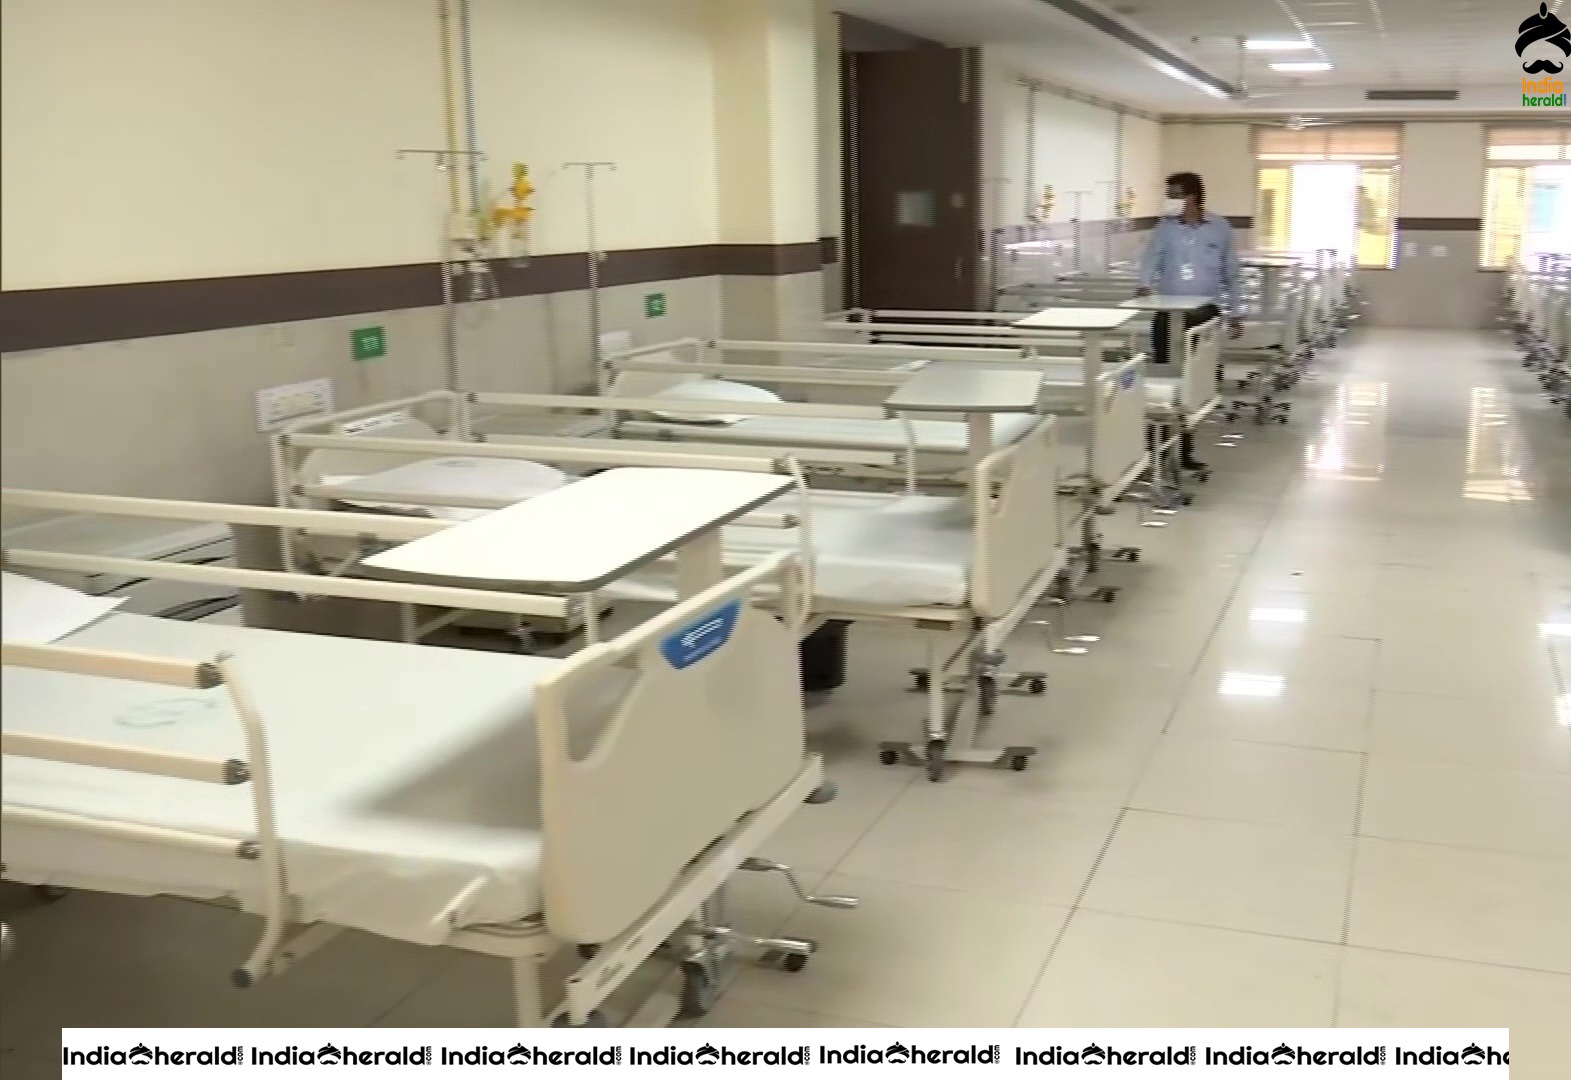 Two dedicated Odisha hospitals with 650 beds capacity provide free treatment to COVID 19 patients